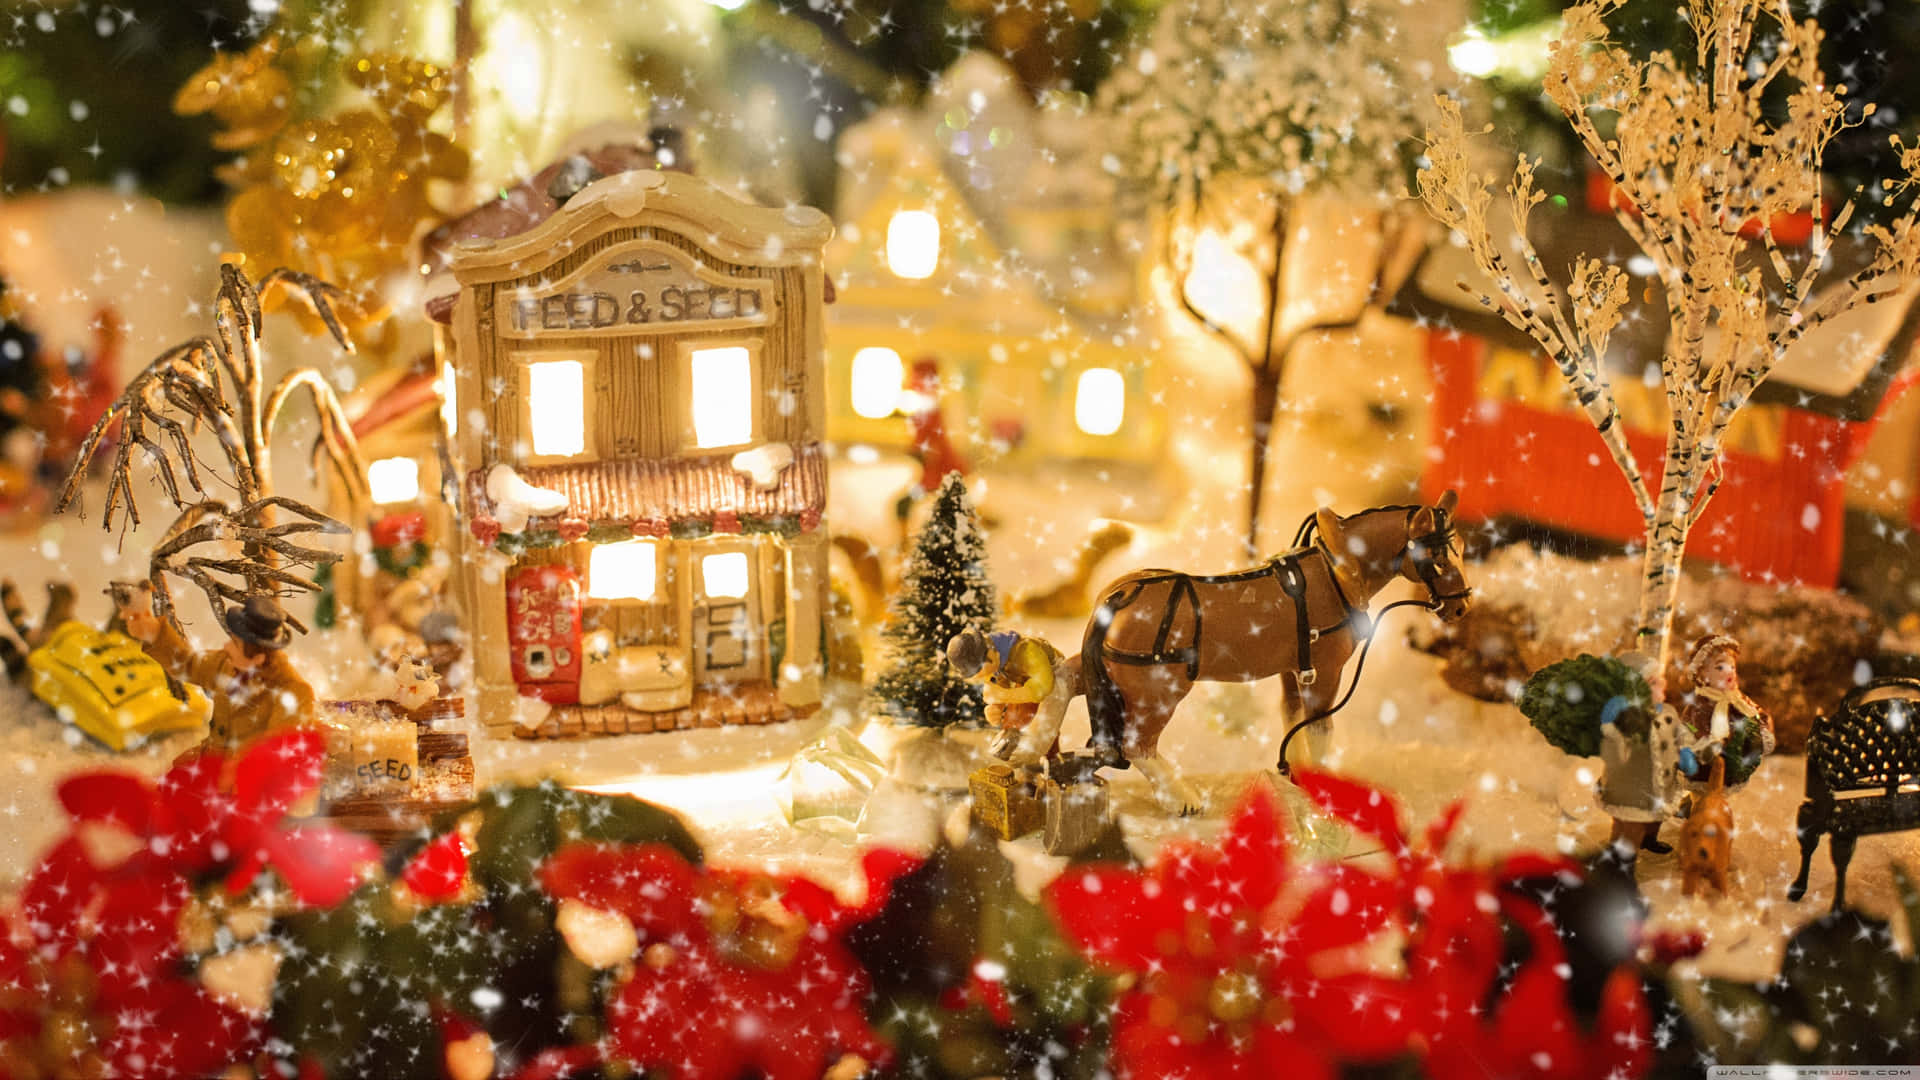 "Welcome to the Magical Christmas Village" Wallpaper